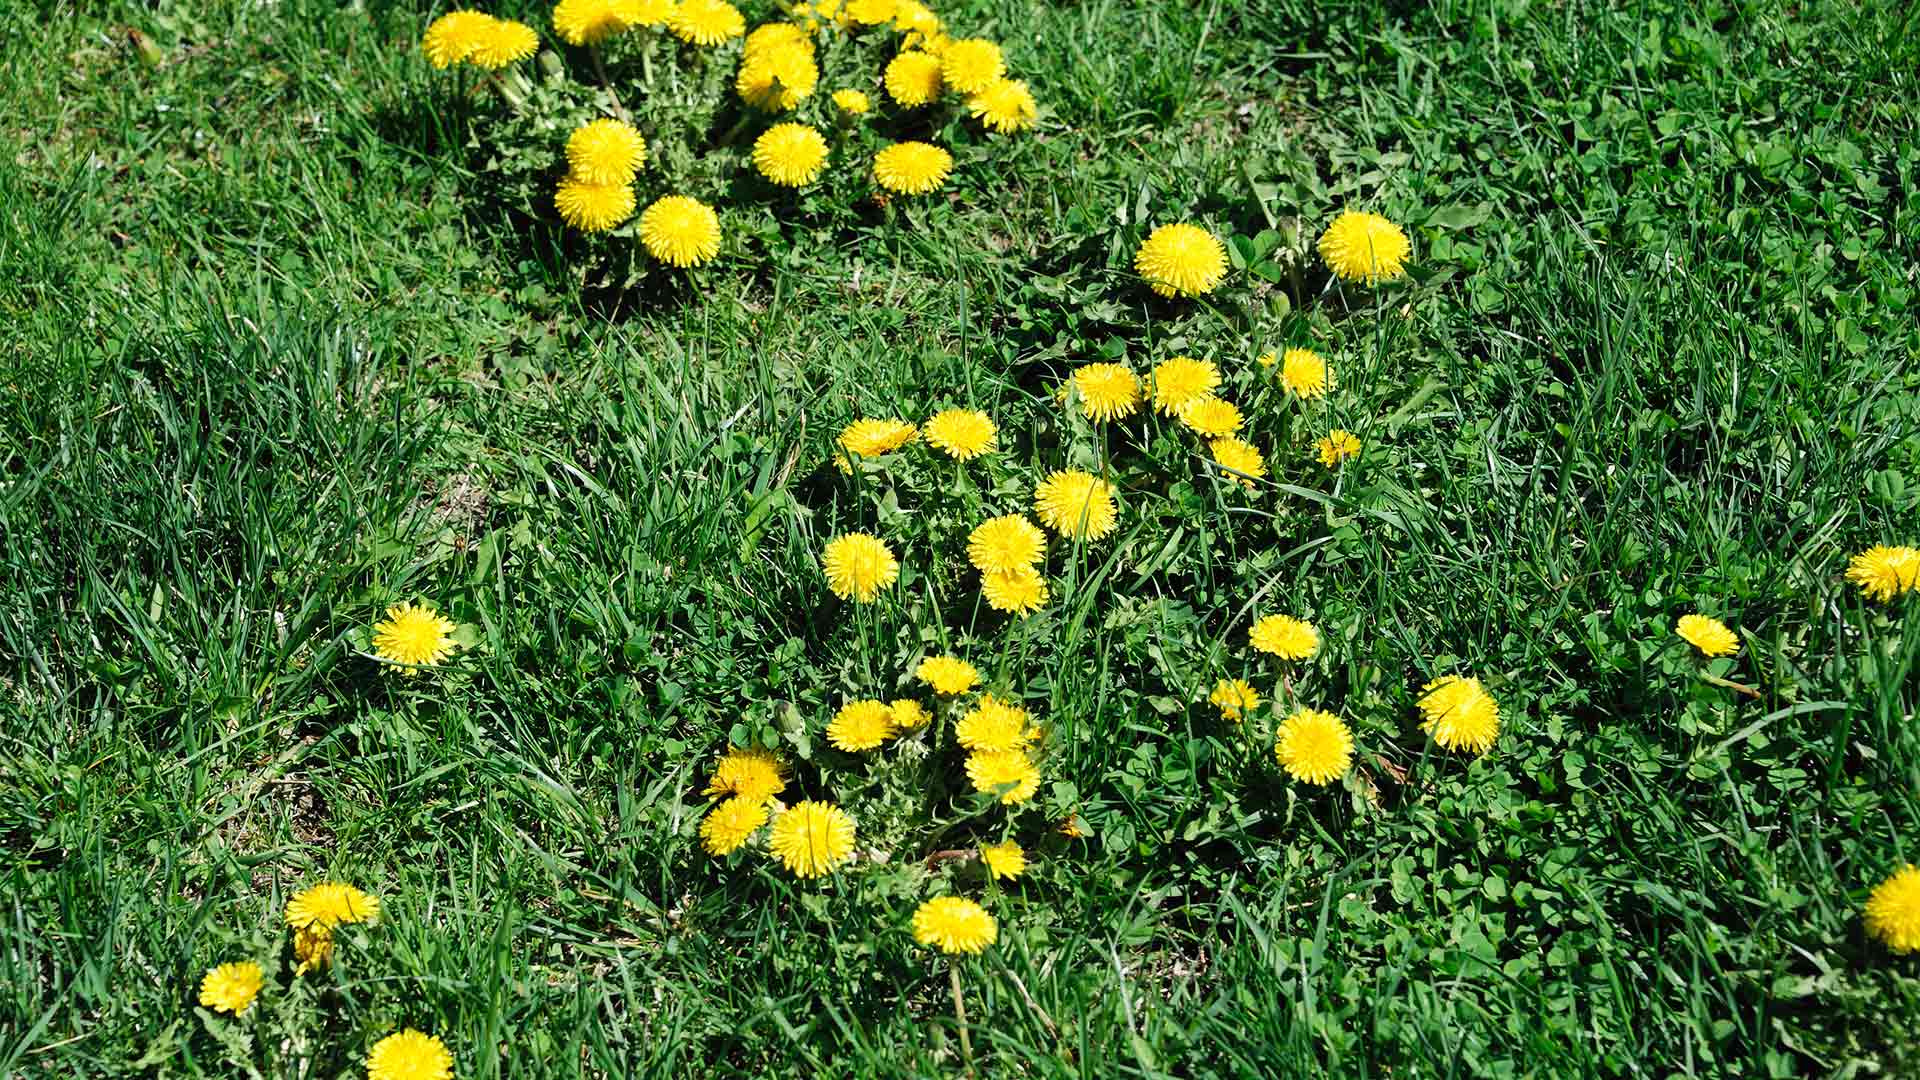 Want a Weed-Free Lawn? You Need to Use Pre- & Post-Emergent Weed Control